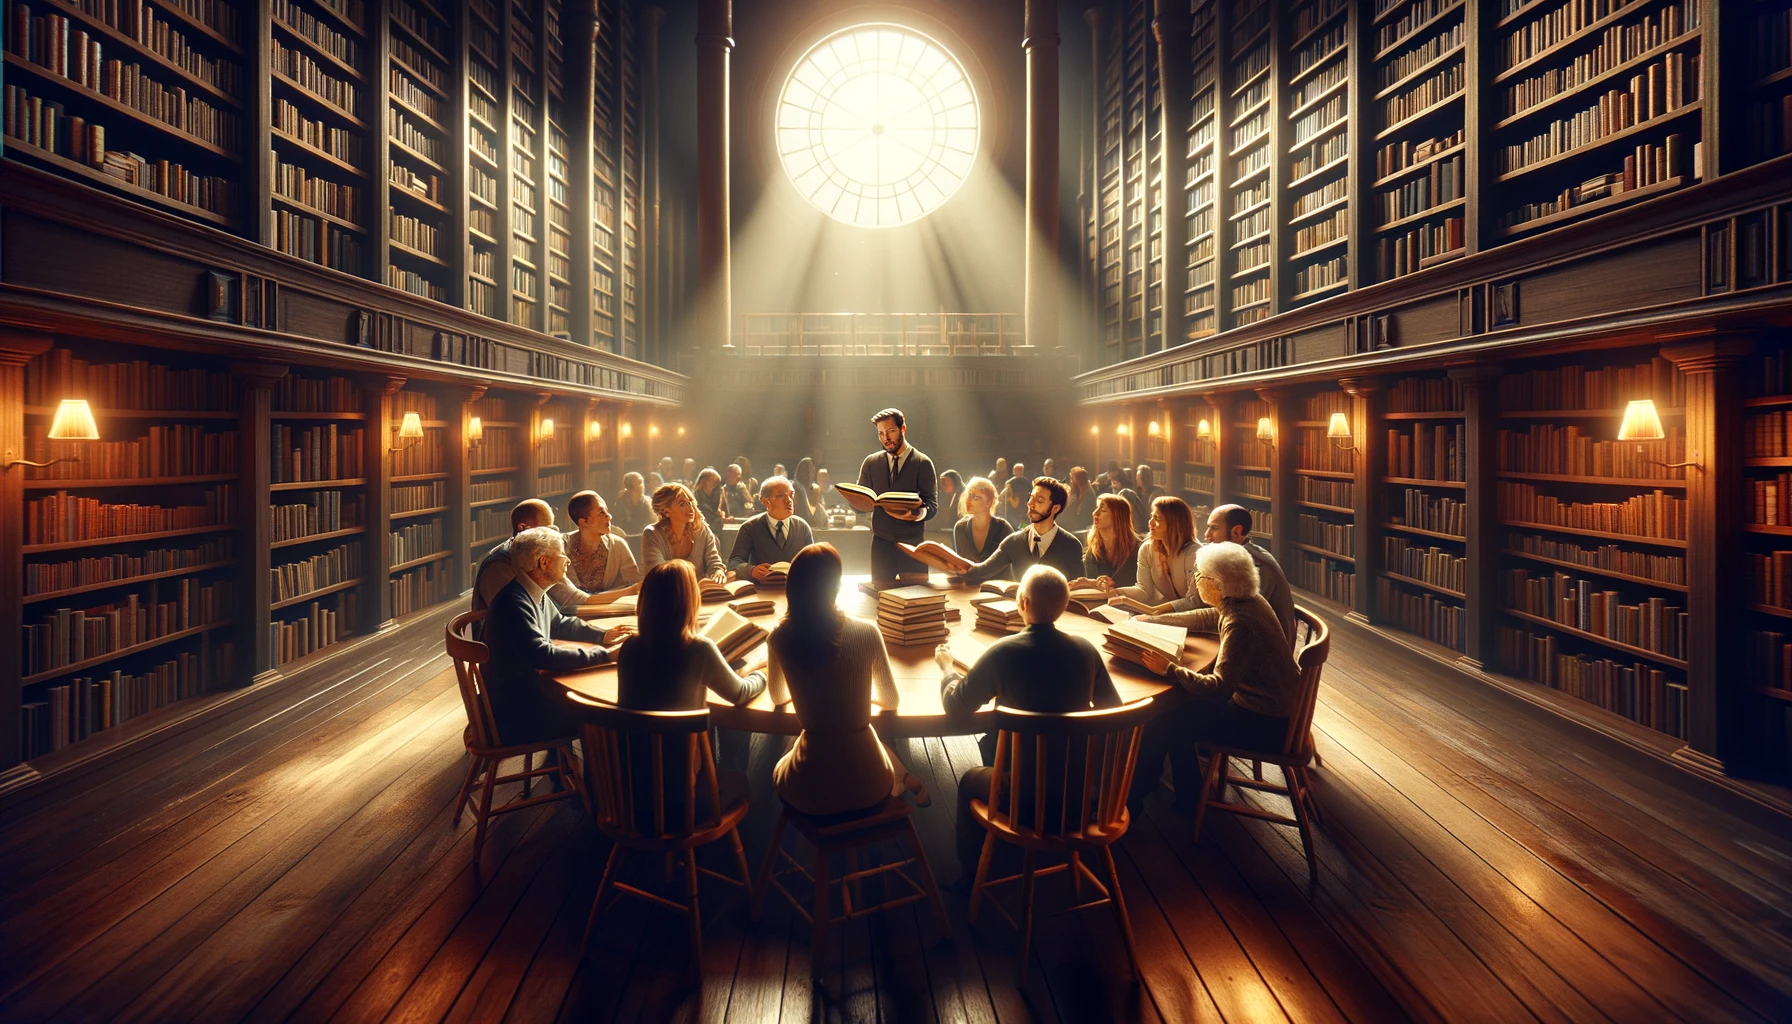 A 16_9 widescreen image that conveys the concept of 'Something Valuable to Share'. The scene is set in a cozy, warmly lit library with tall, wooden bo